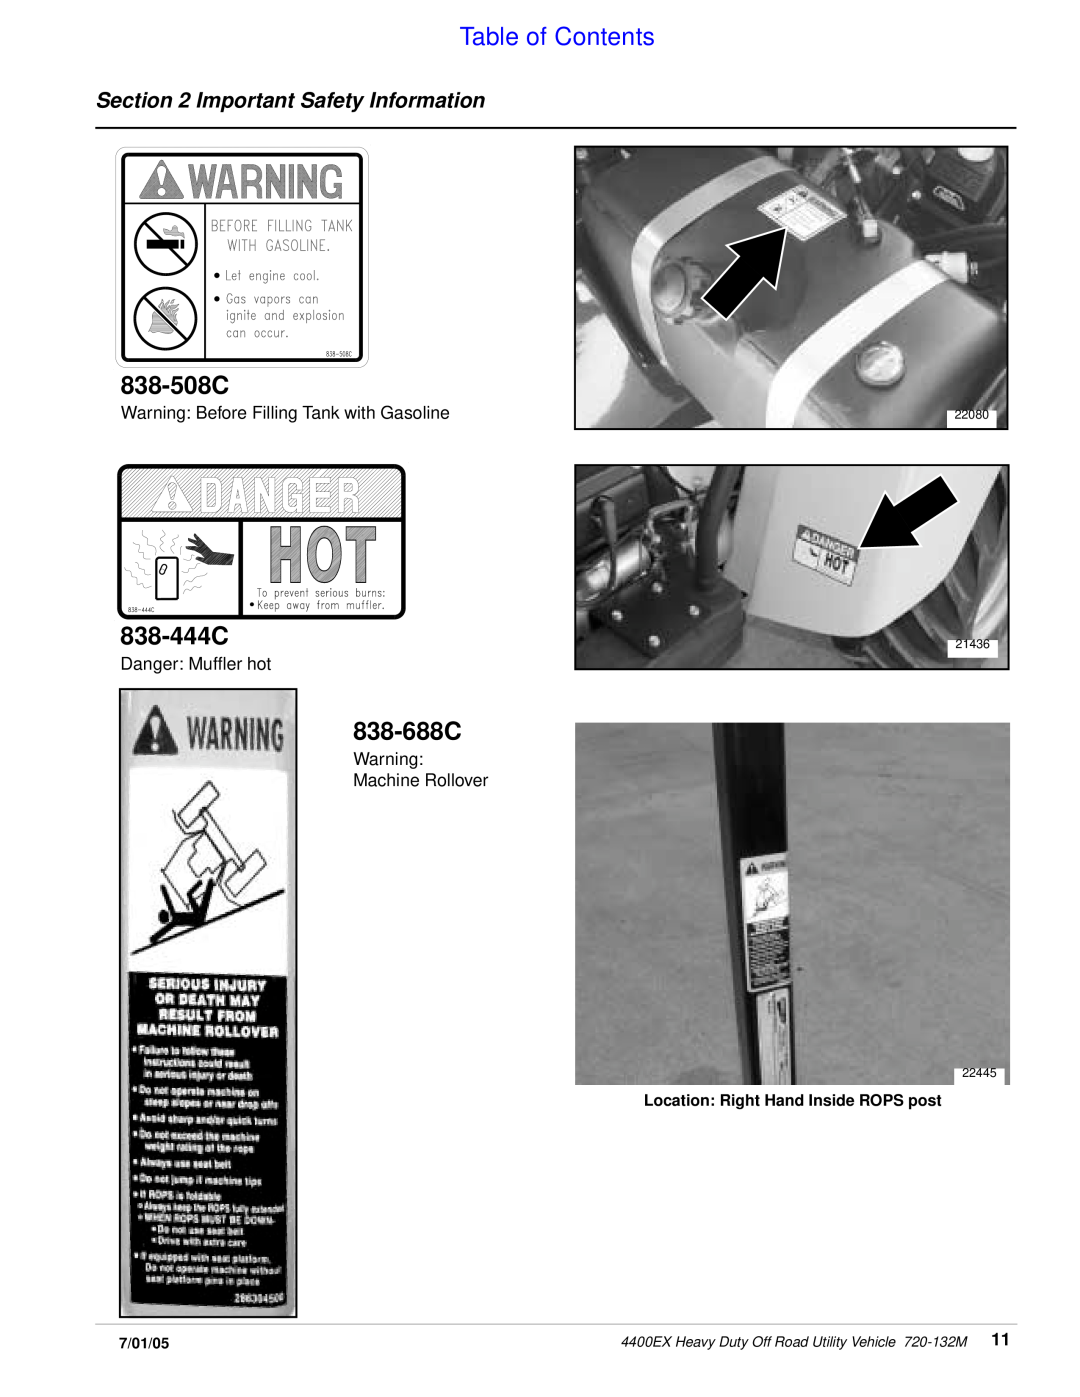 Land Pride 22076 838-688C, 838-508C, 838-444C, Table of Contents, Important Safety Information, 7/01/05, 22080, 22445 